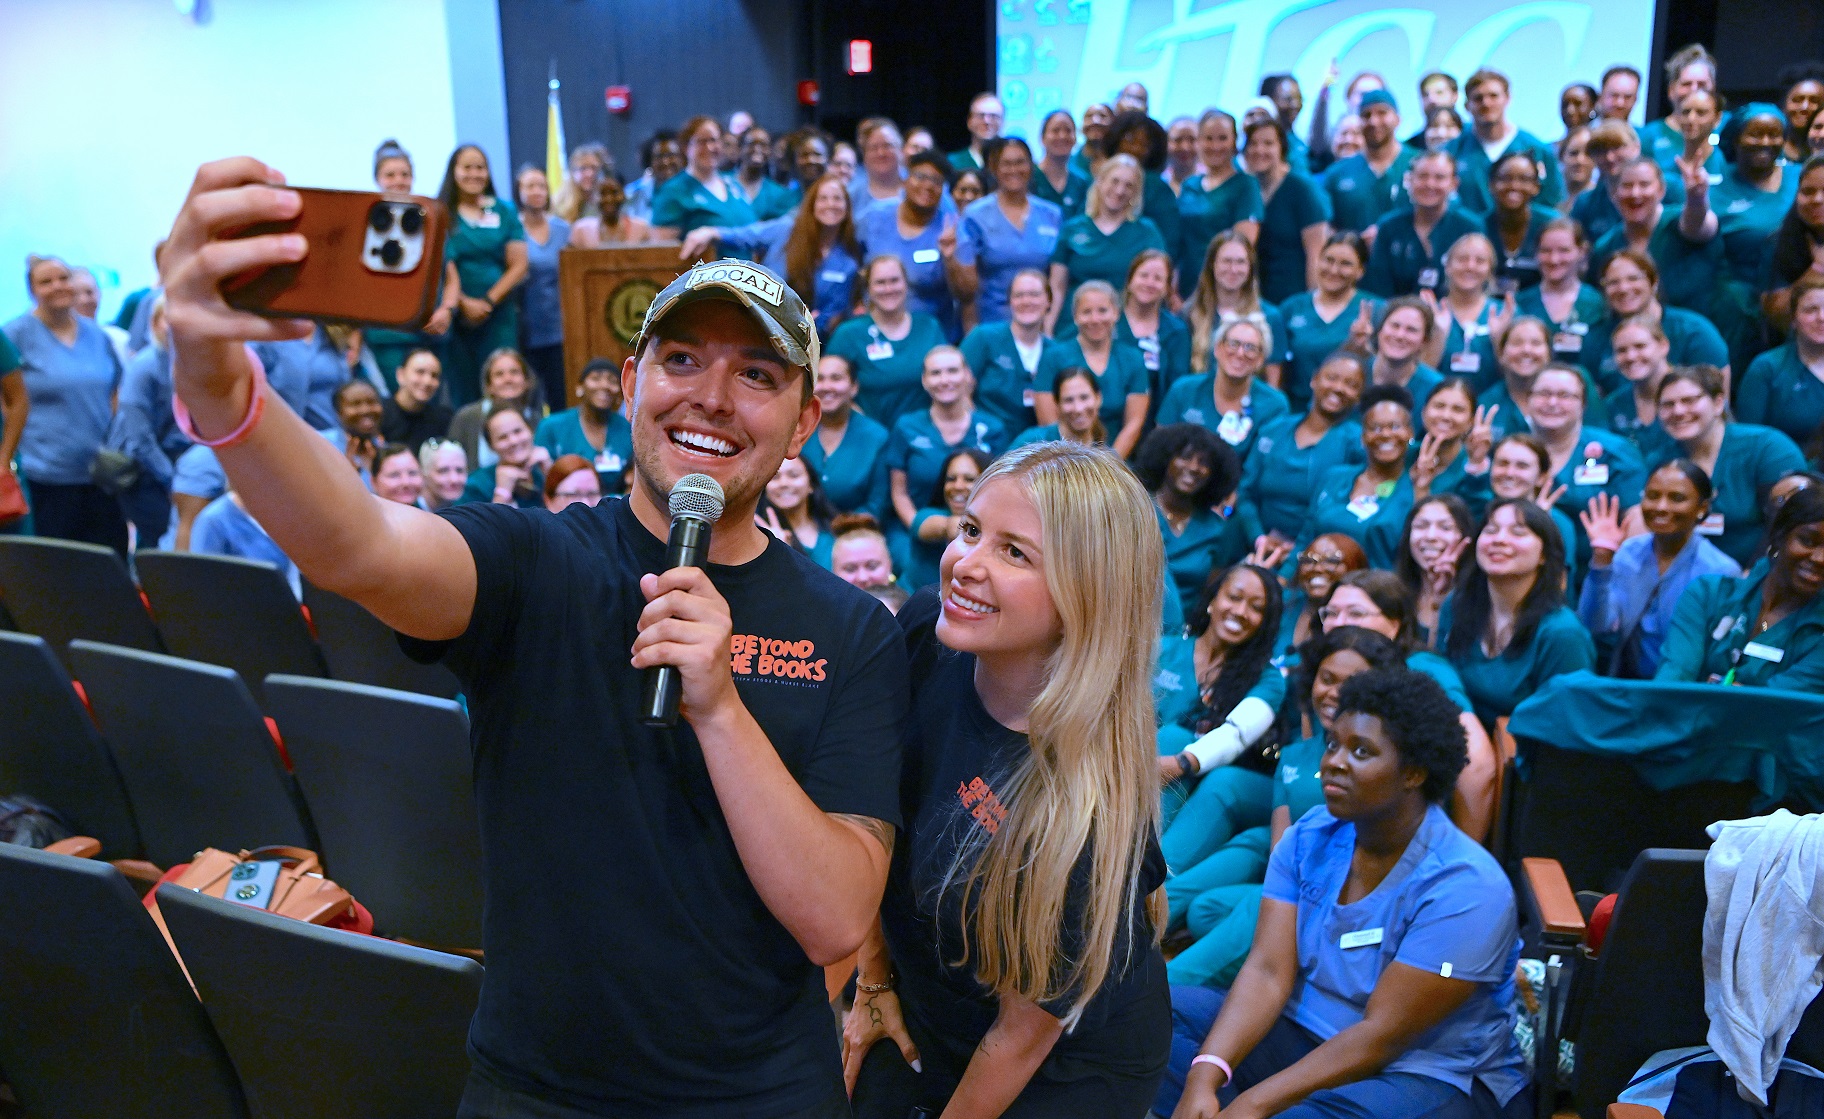 Blake Lynch, known as Nurse Blake, and Stephanee Beggs take a selfie in front of the audience of FTCC Nursing students. [Photo by Brad Losh]